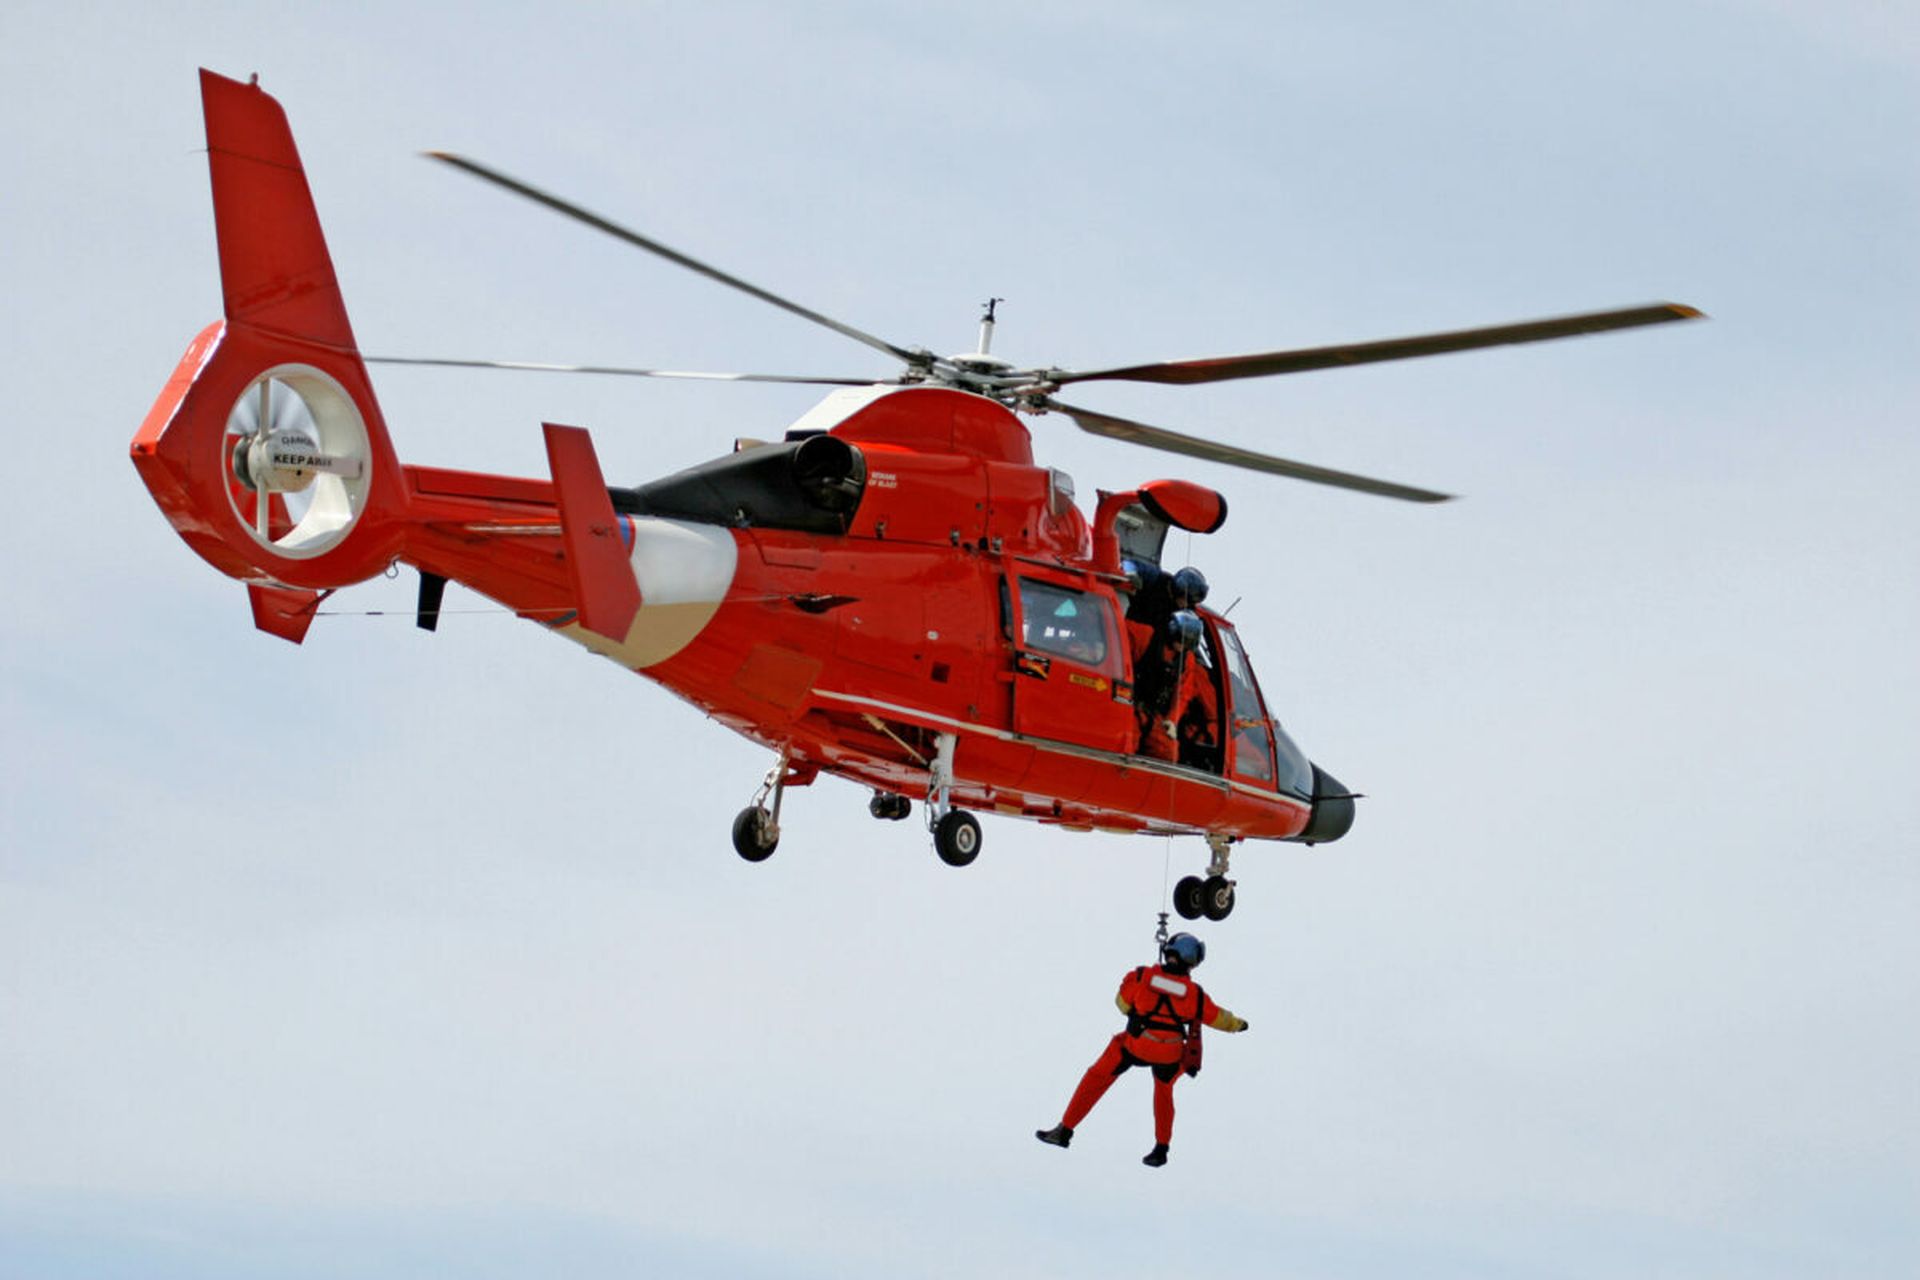 The United States Coast Guard wants to model its new cybersecurity-specific positions after the agency’s diving program, with officials saying they would rather take their time to select the best people for the job than invest hundreds of thousands of dollars on the wrong candidate. (Photo Credit: DanCardiff via Getty)